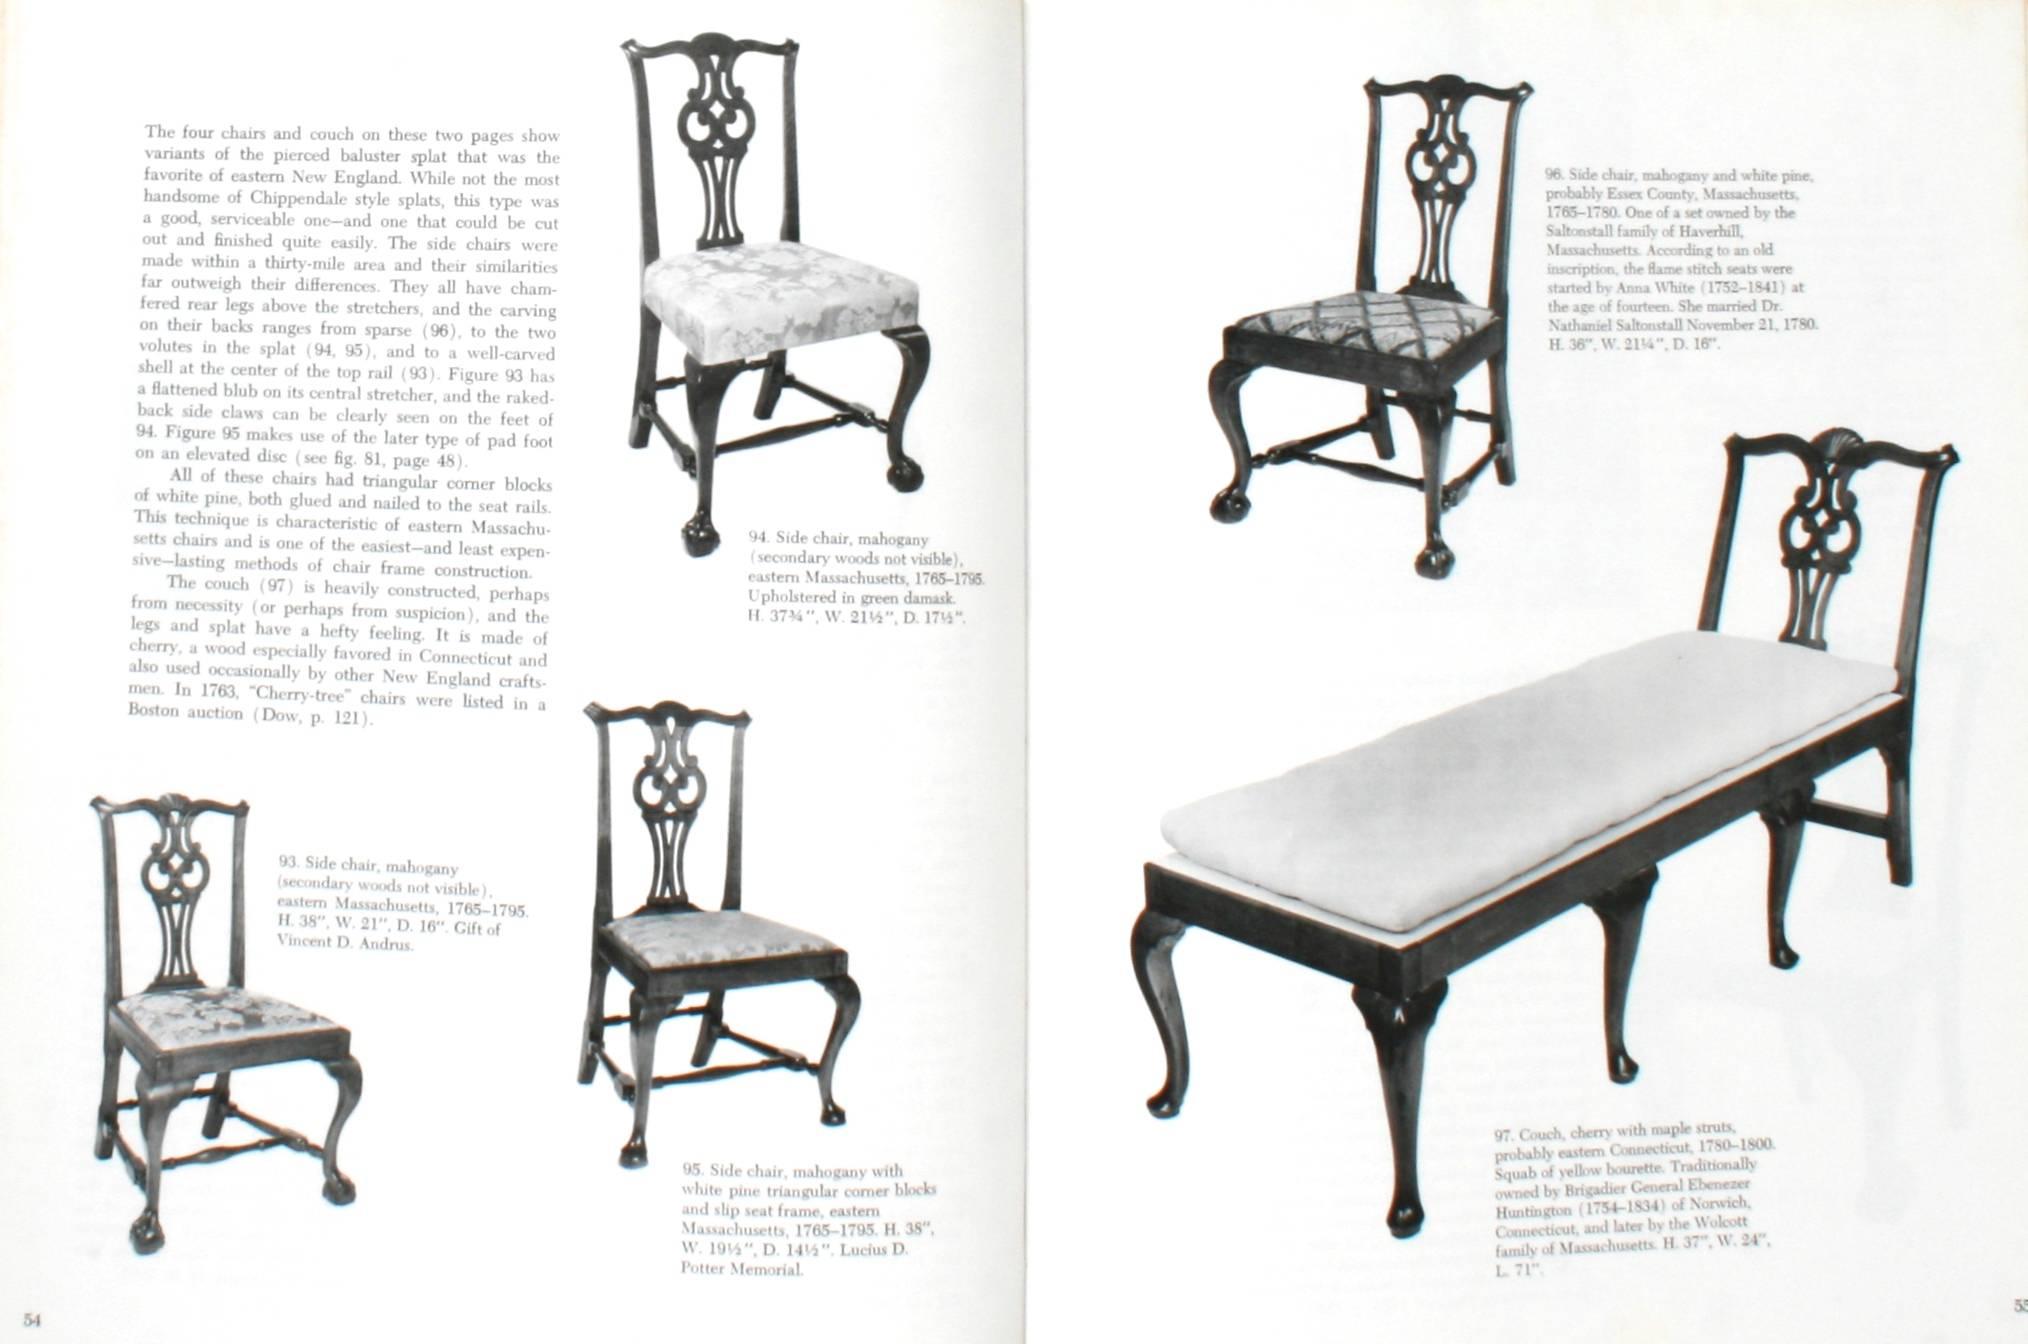 The Furniture of Historic Deerfield by Dean A. Fales. Deerfield: Historic Deerfield, Inc., 1981. Second edition hardcover with dust jacket. 294 pp. A book on the antique American furniture collections of historic Deerfield Massachusetts. The book